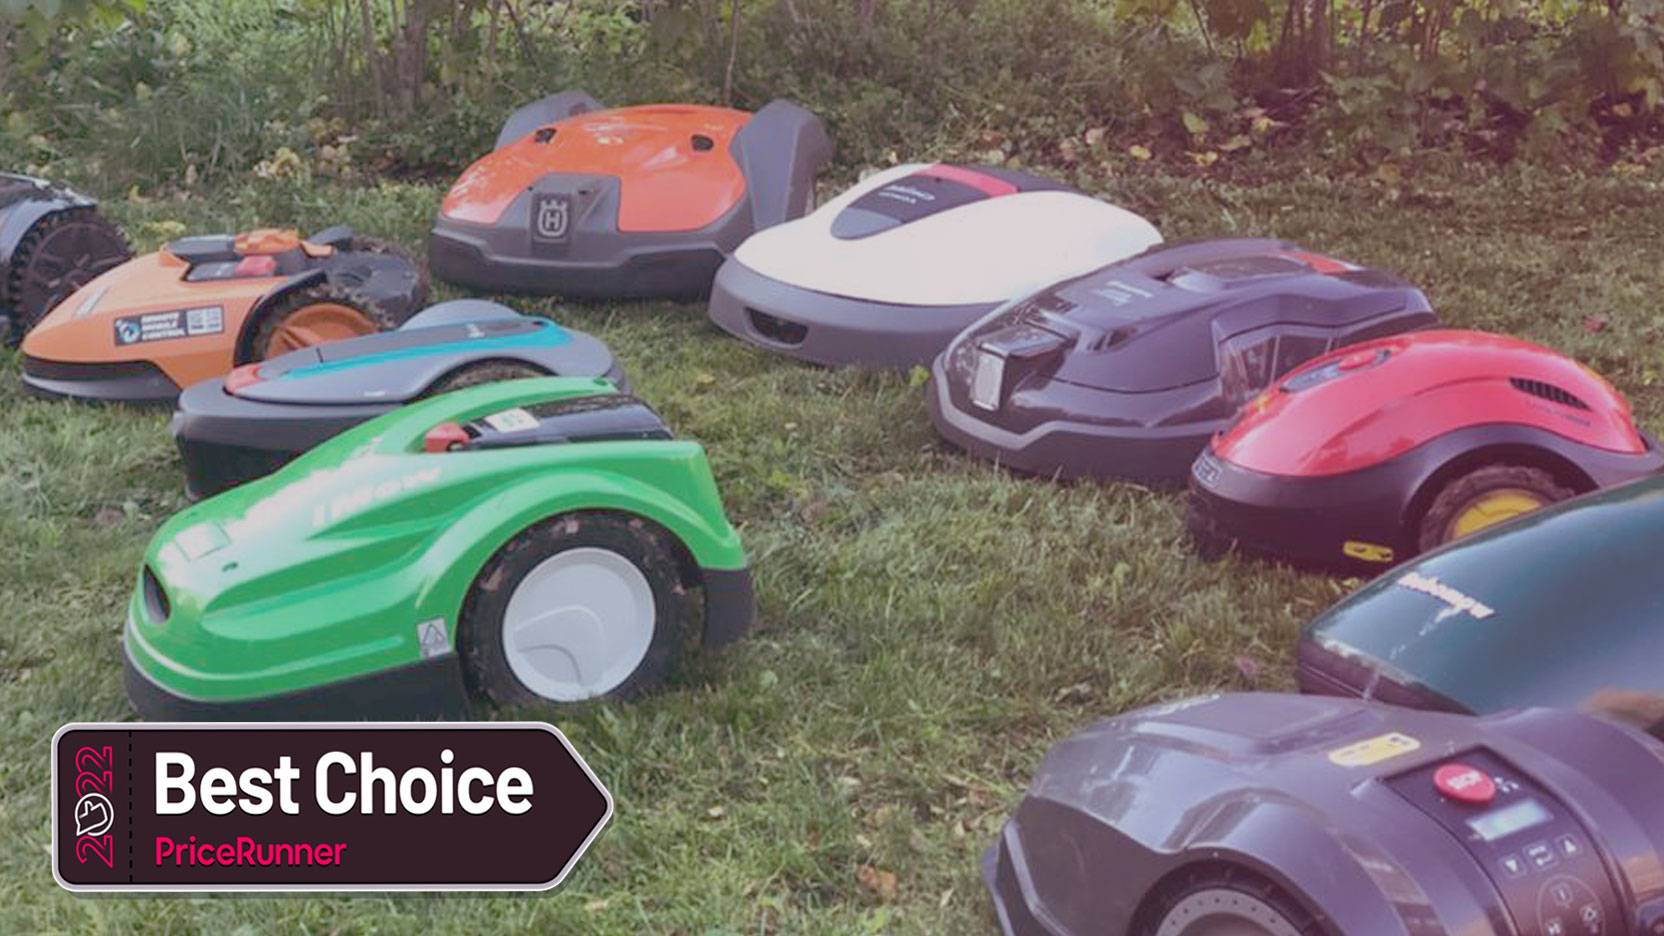 Withered Betjening mulig Opstå Top 24 Best Robotic lawn mowers of 2022 → Reviewed & Ranked